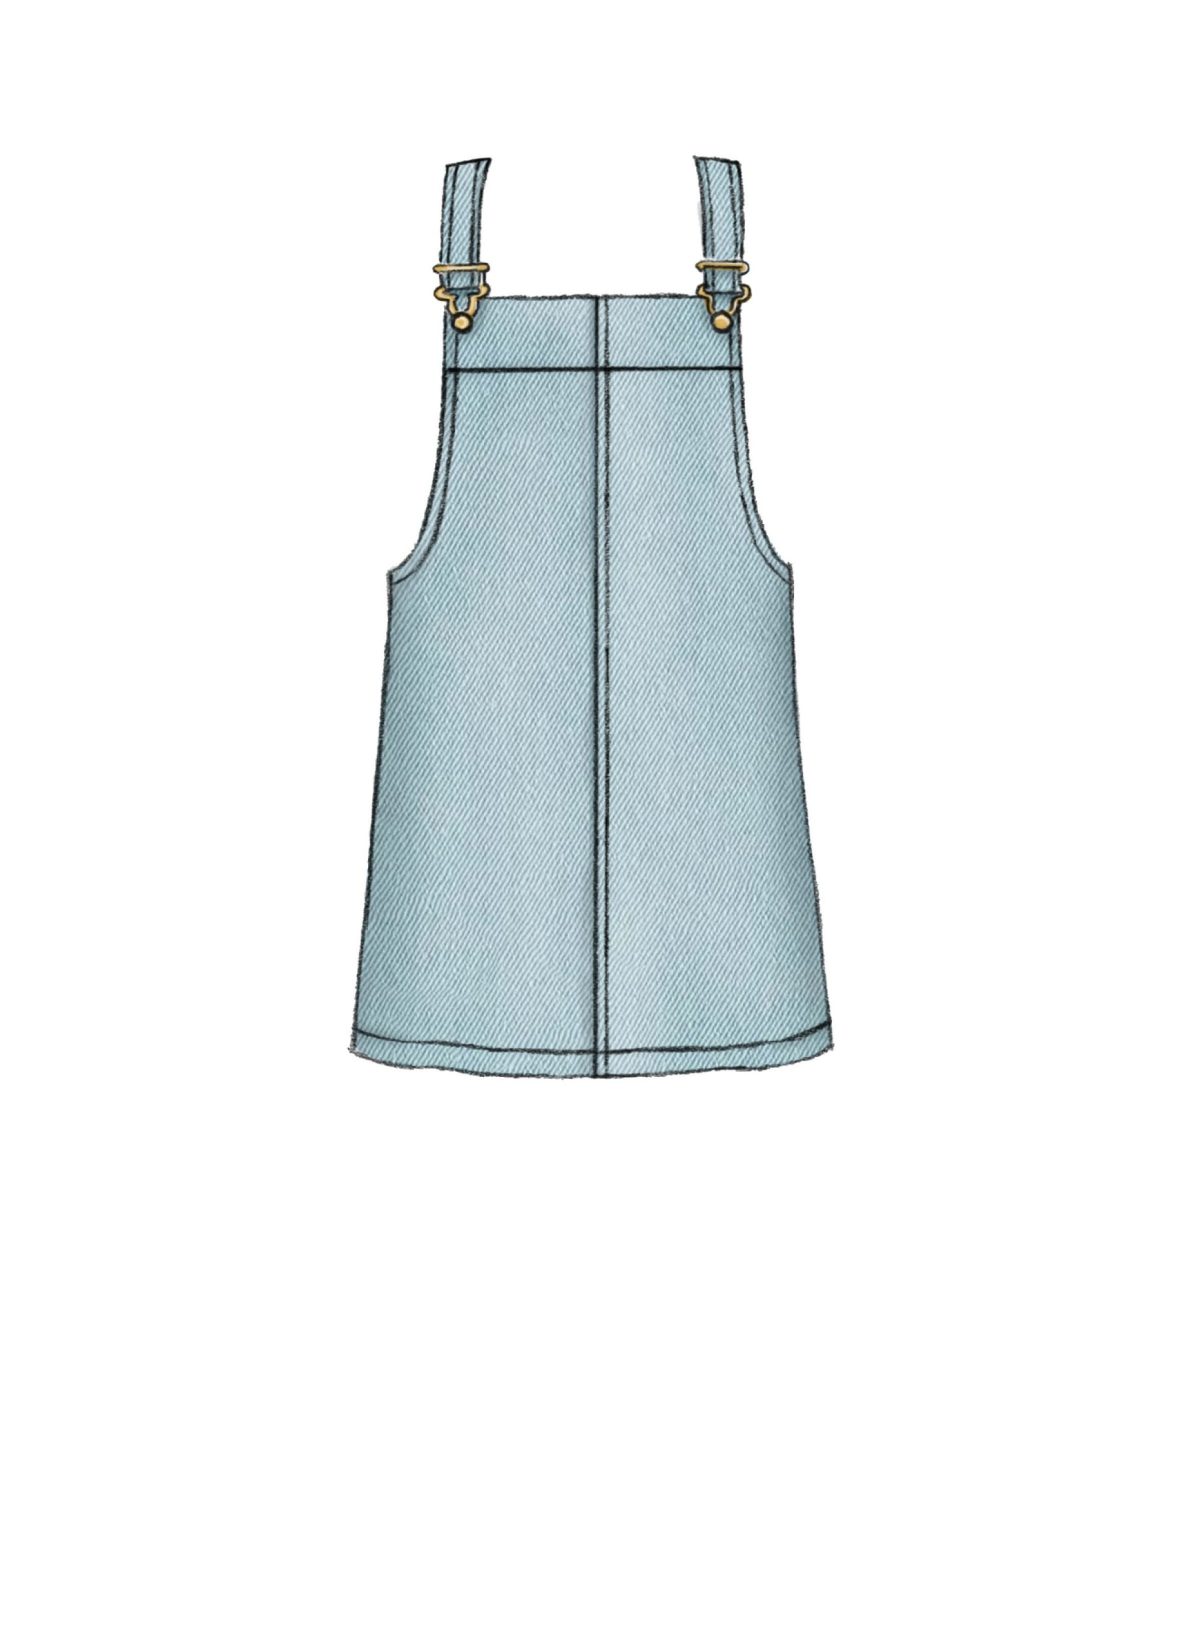 McCall's Sewing Pattern M7831 Misses' Pinafore Dresses